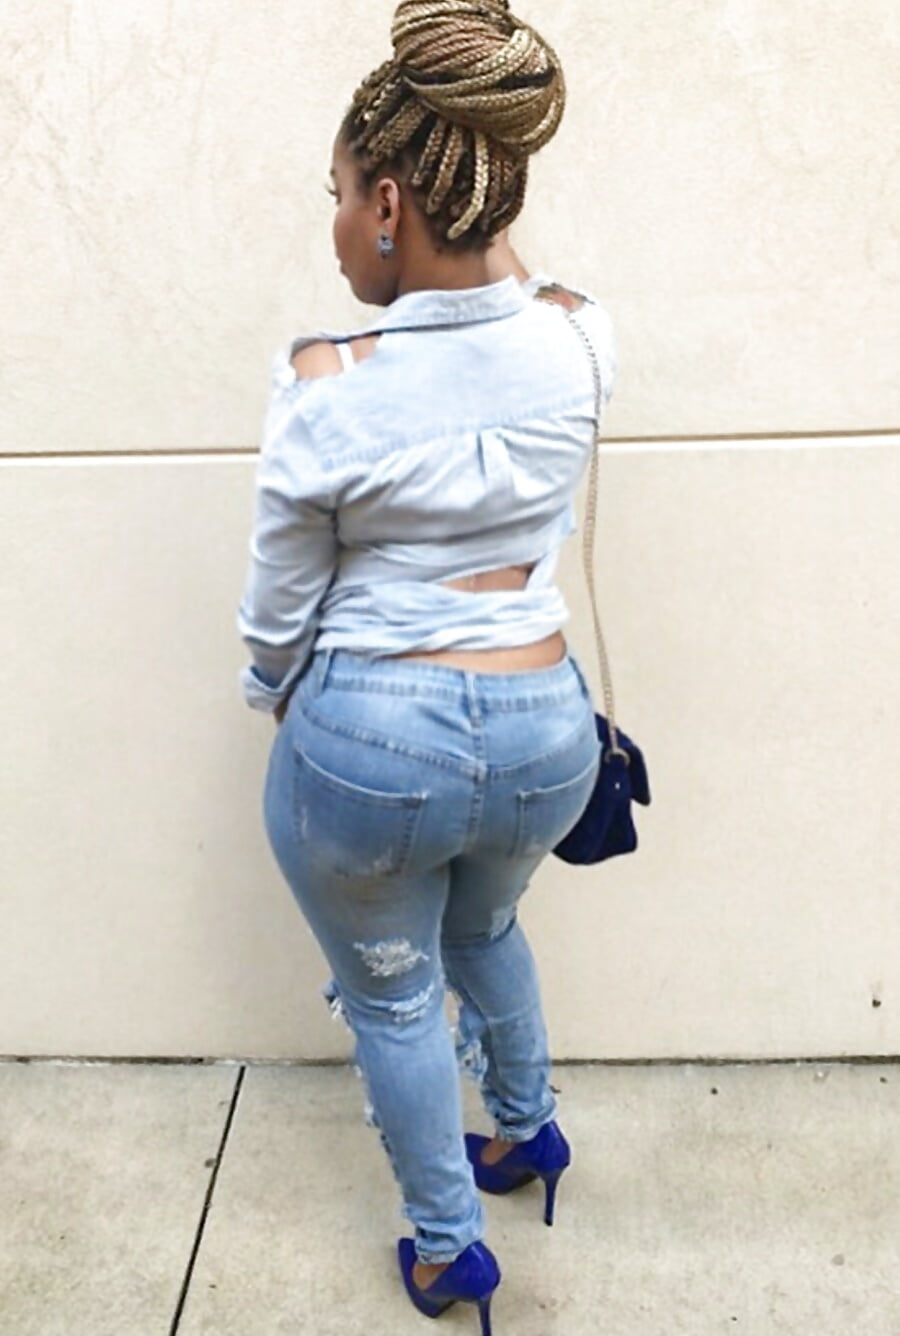 Black_Asses_in_Jeans_6 (14/94)